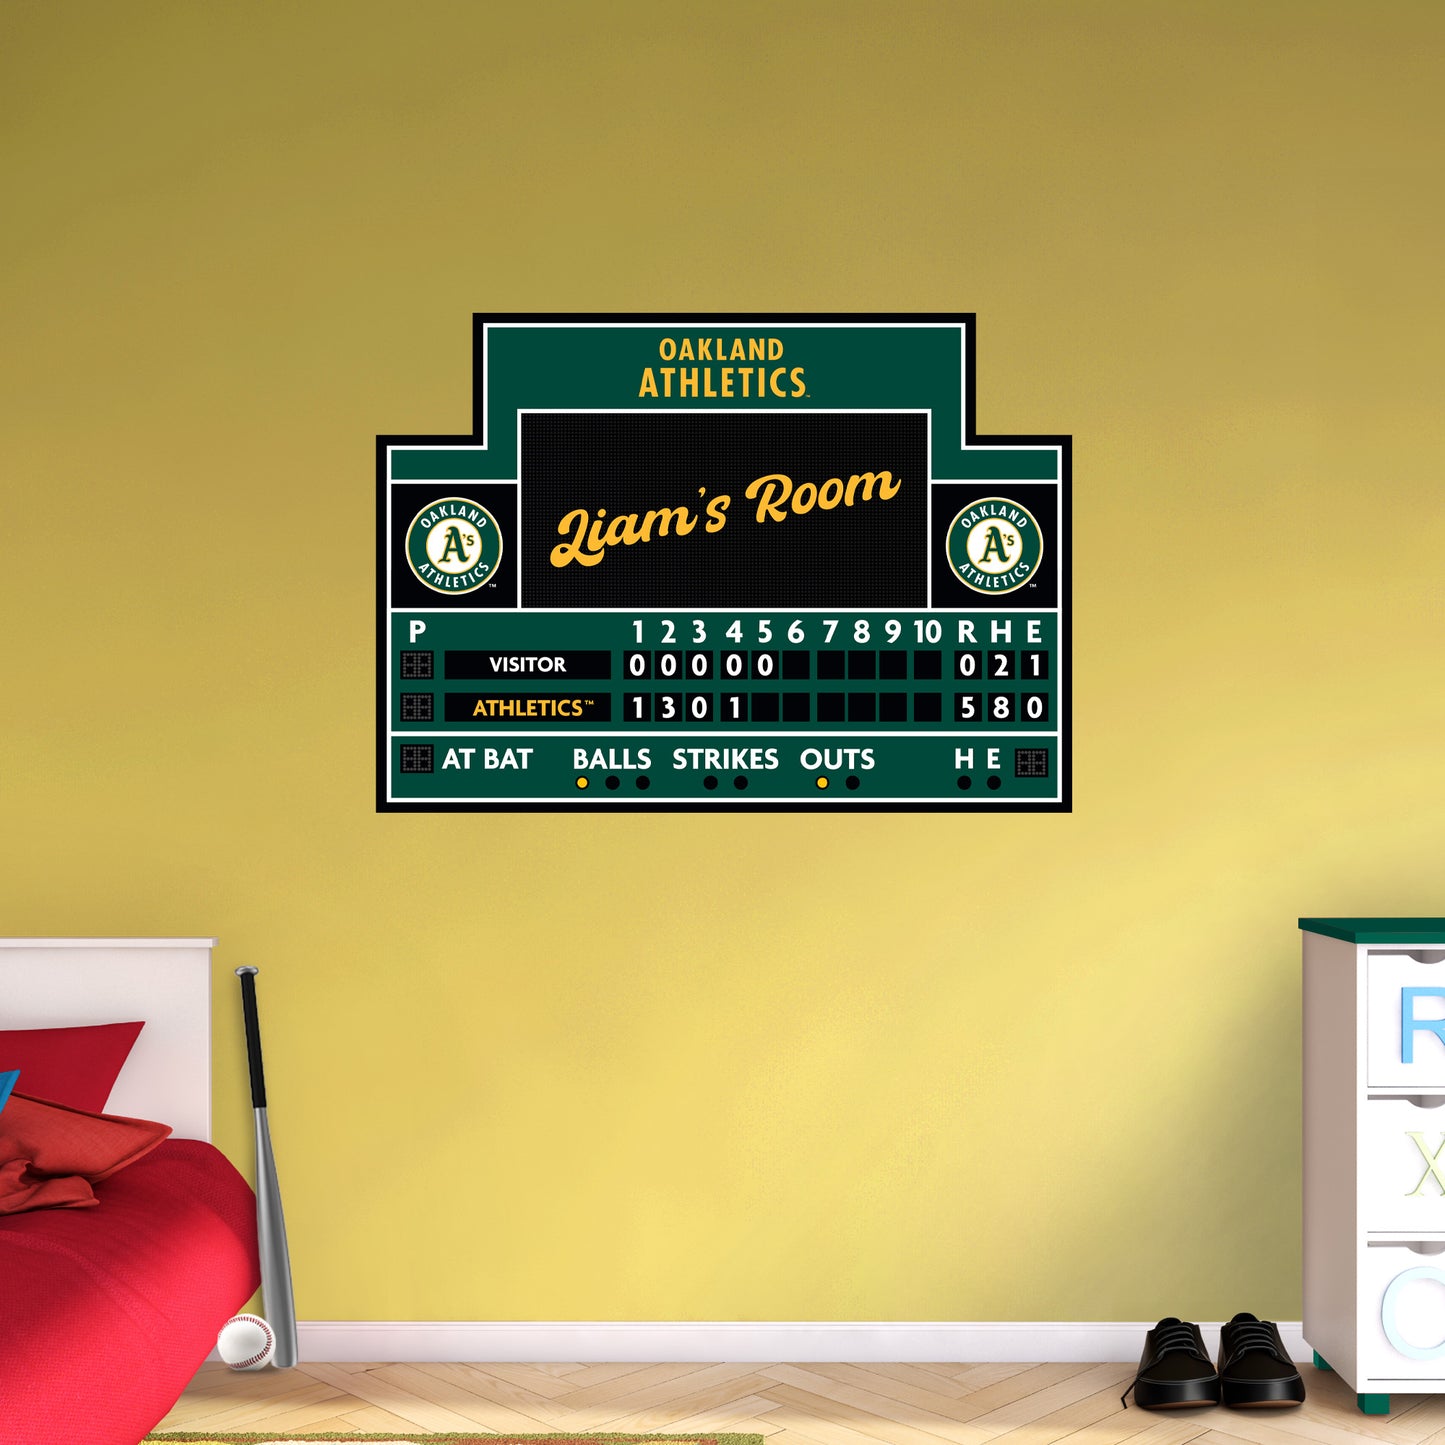 Oakland Athletics: Scoreboard Personalized Name        - Officially Licensed MLB Removable     Adhesive Decal